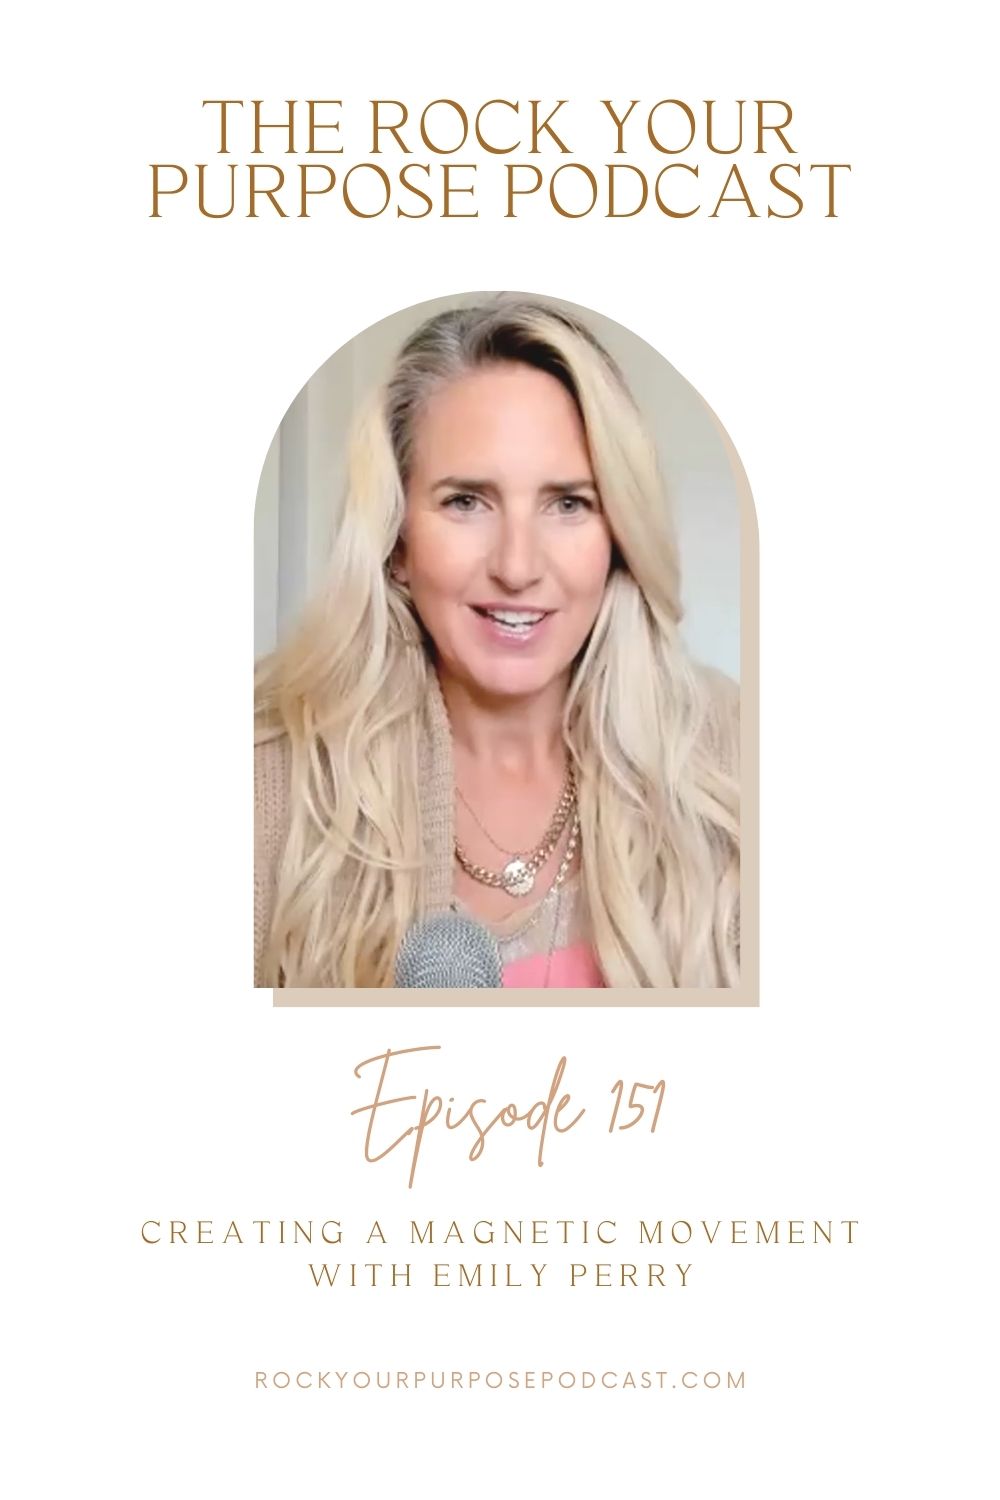 emily perry episode 151 rock your purpose podcast magnetic movement